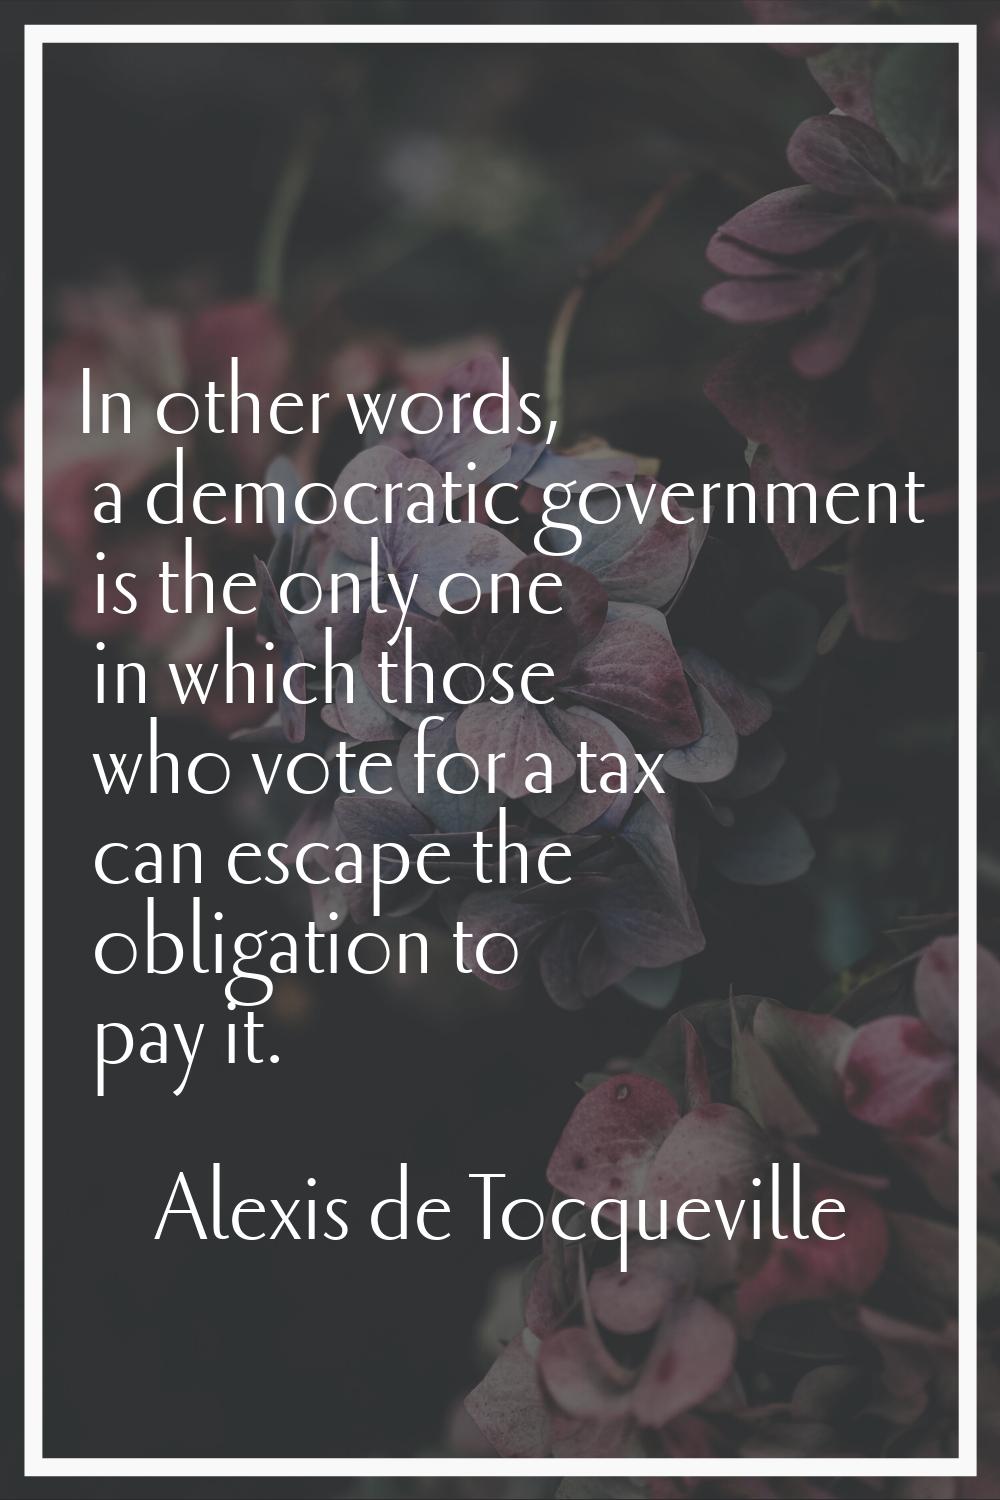 In other words, a democratic government is the only one in which those who vote for a tax can escap